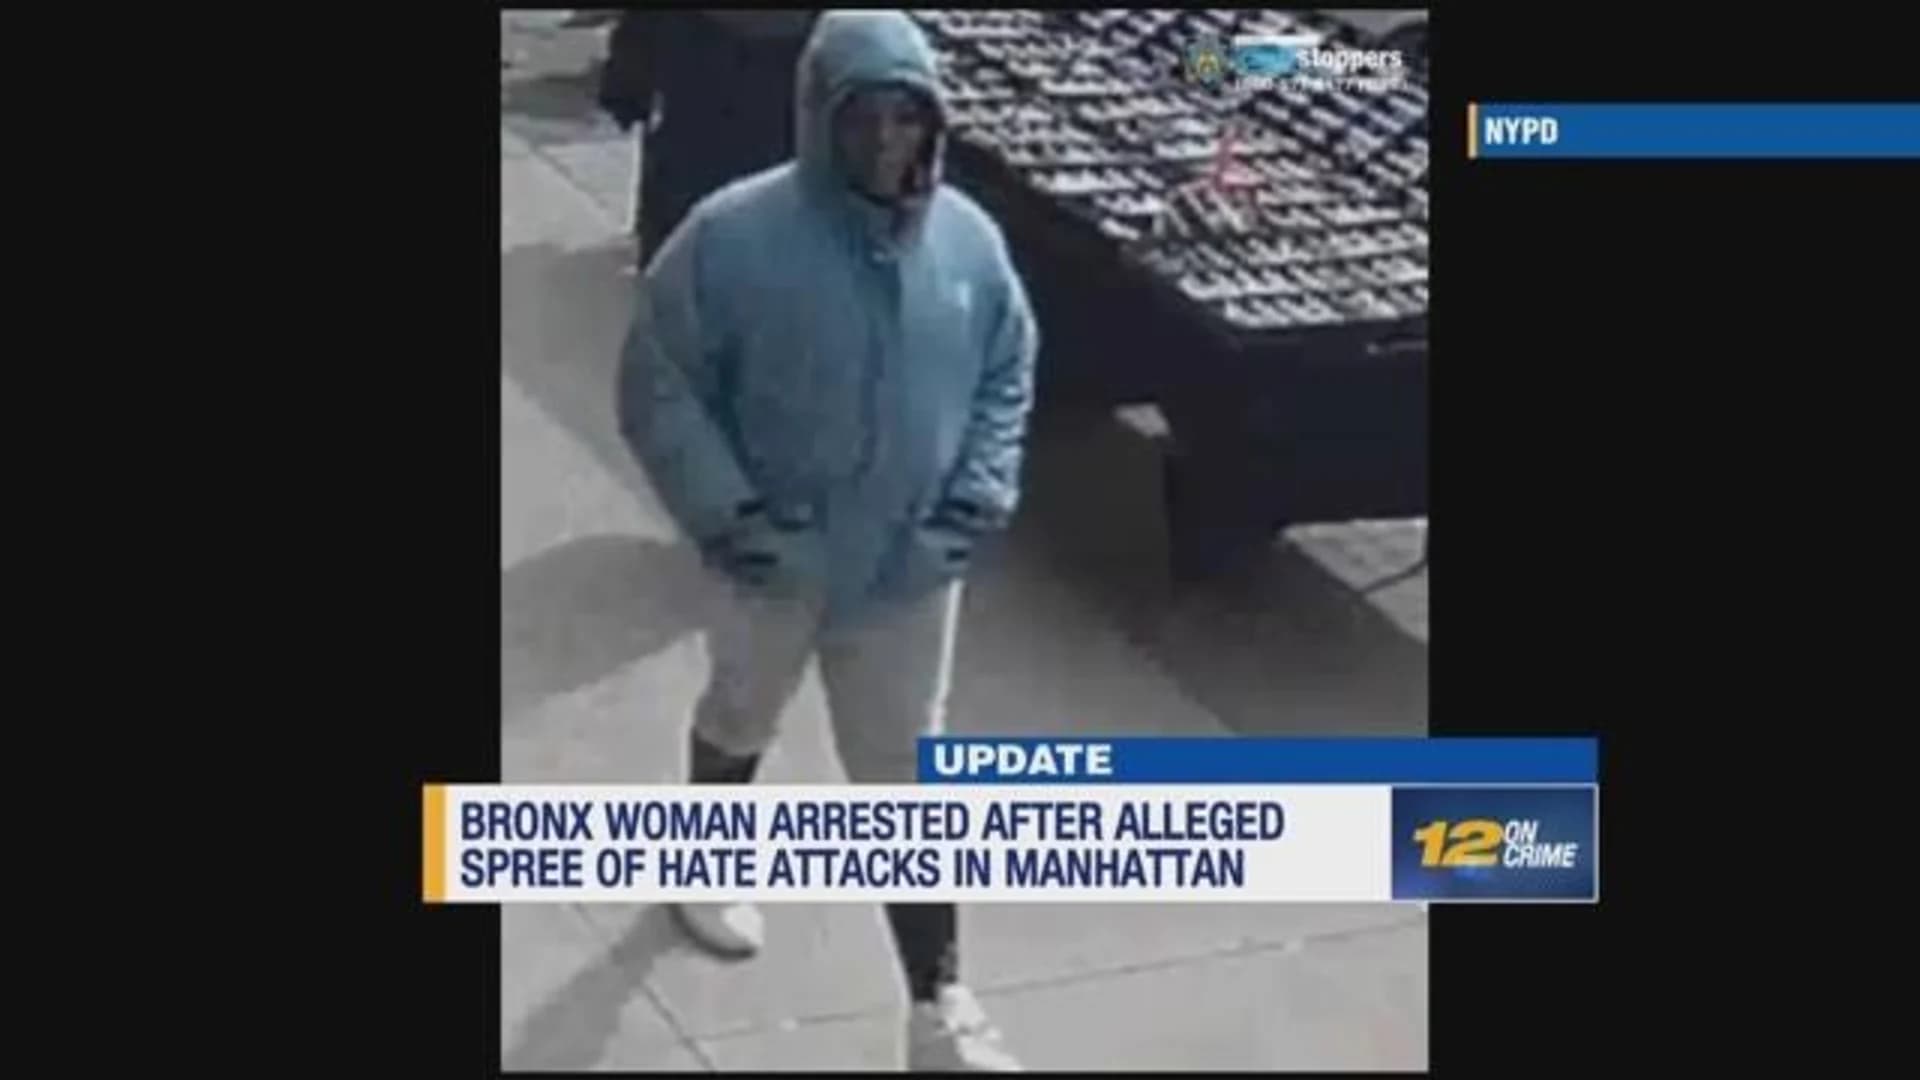 Police: Suspect arrested in series of NYC spray attacks